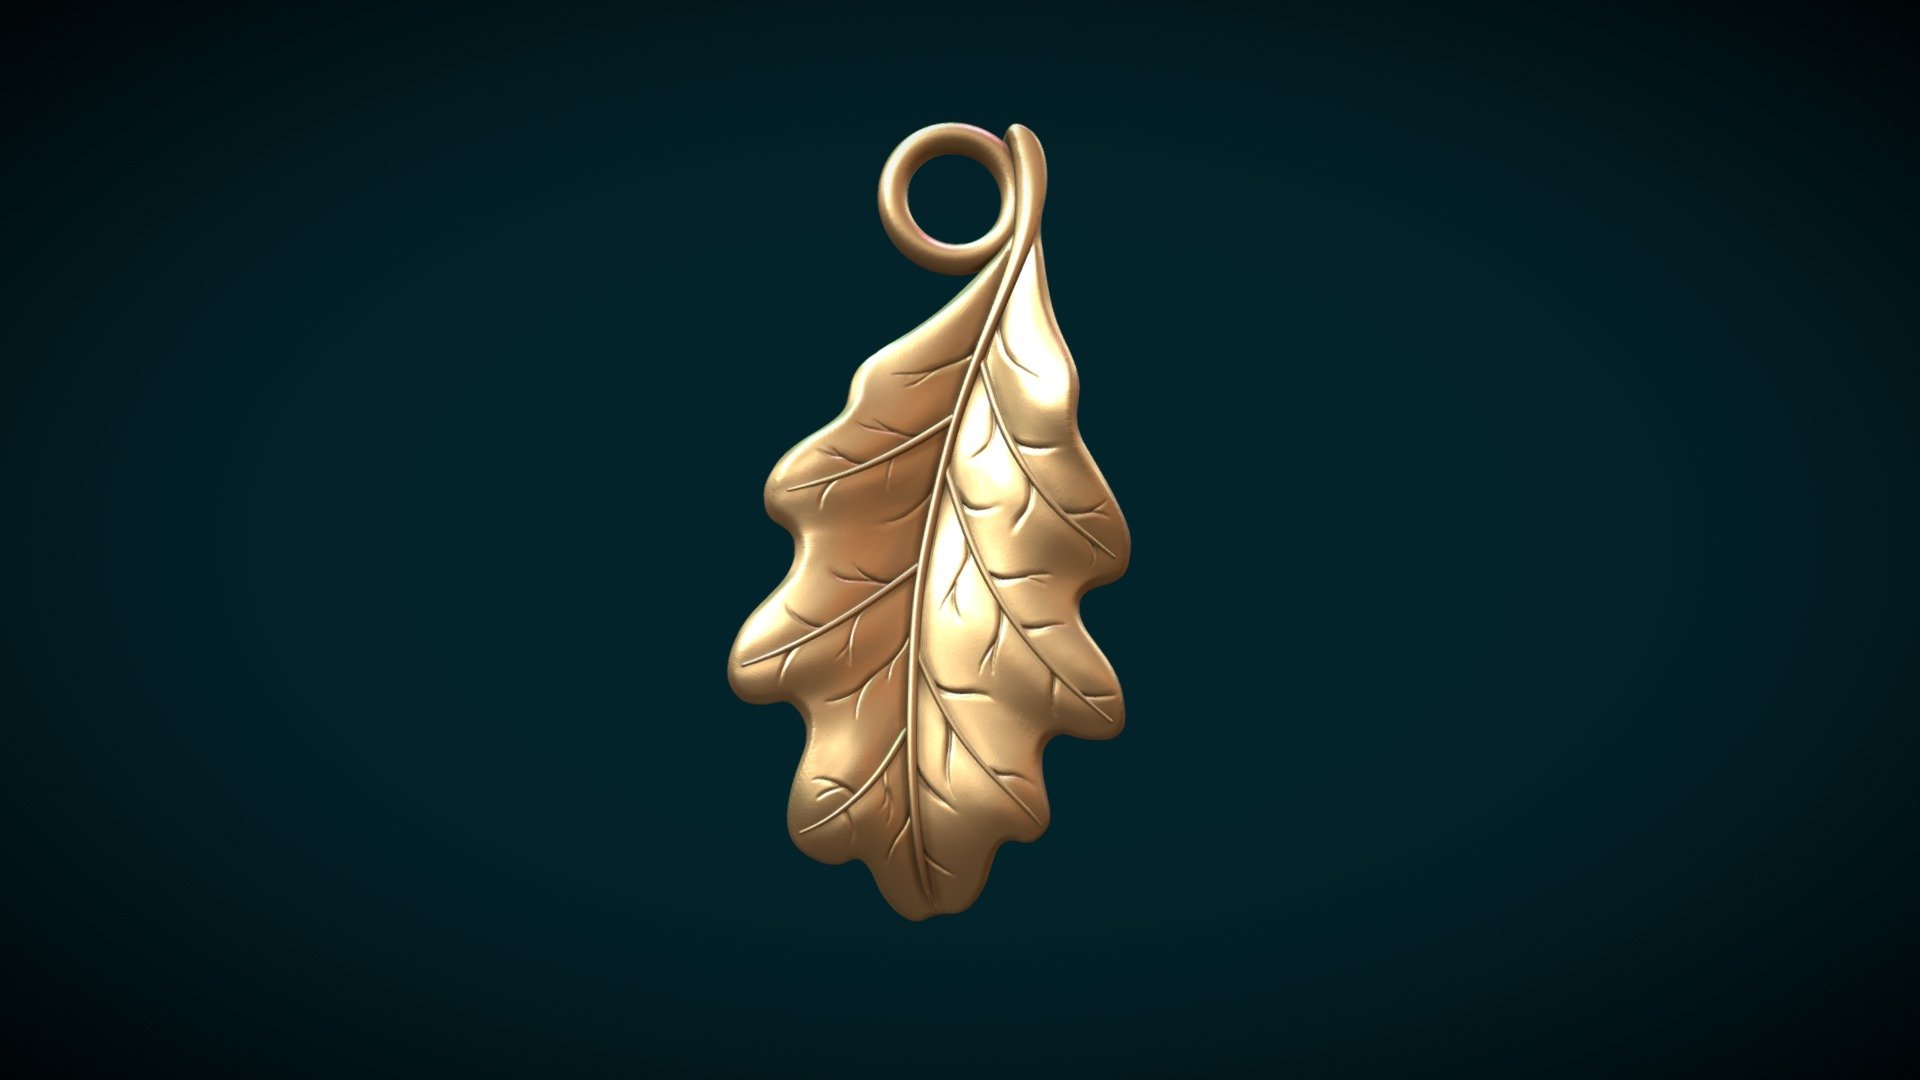 Print ready Oak Leaf charm.

Measure units are millimeters, it is about 2 cm in width.

Mesh is manifold, no holes, no inverted faces, no bad contiguous edges.

Available formats: .blend, .stl, .obj, .fbx, .dae

The model consists of 194012 triangular faces.

The ring and the leaf are separate objects. For stl format there is additional file that contains only the leaf 3d model